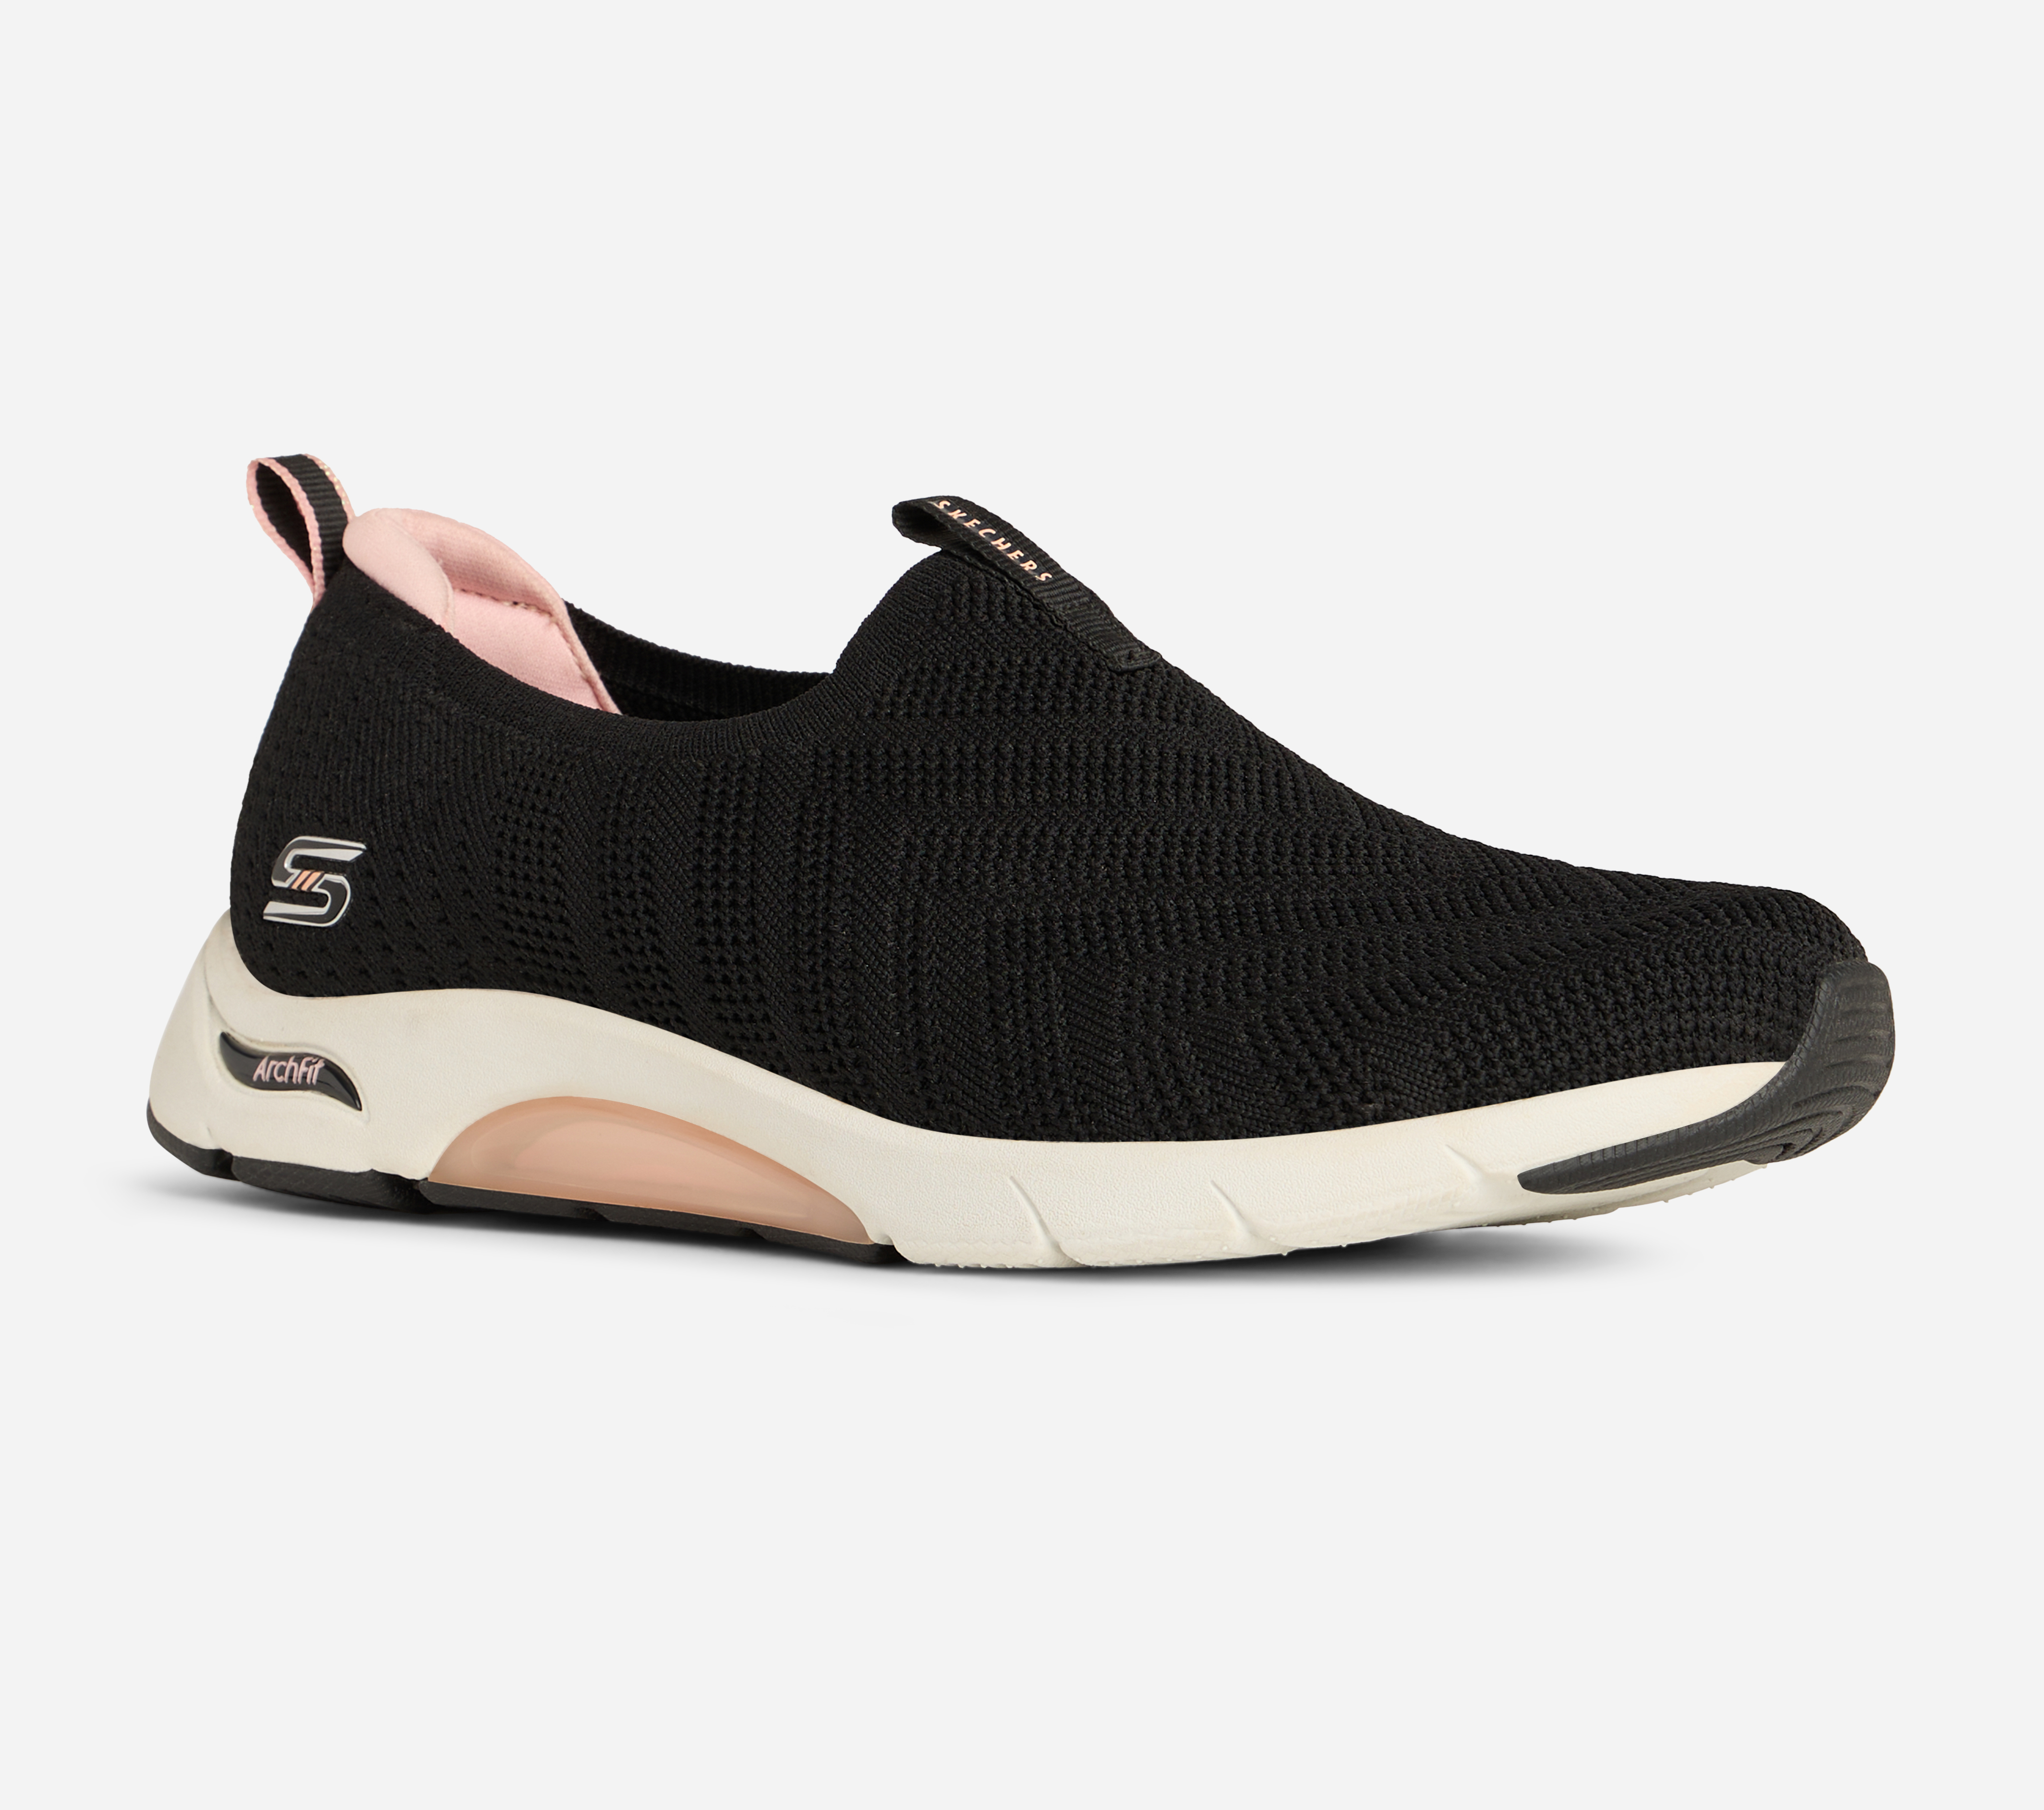 SKECH-AIR ARCH FIT - TOP PICK, BLACK/LIGHT PINK Footwear Right View